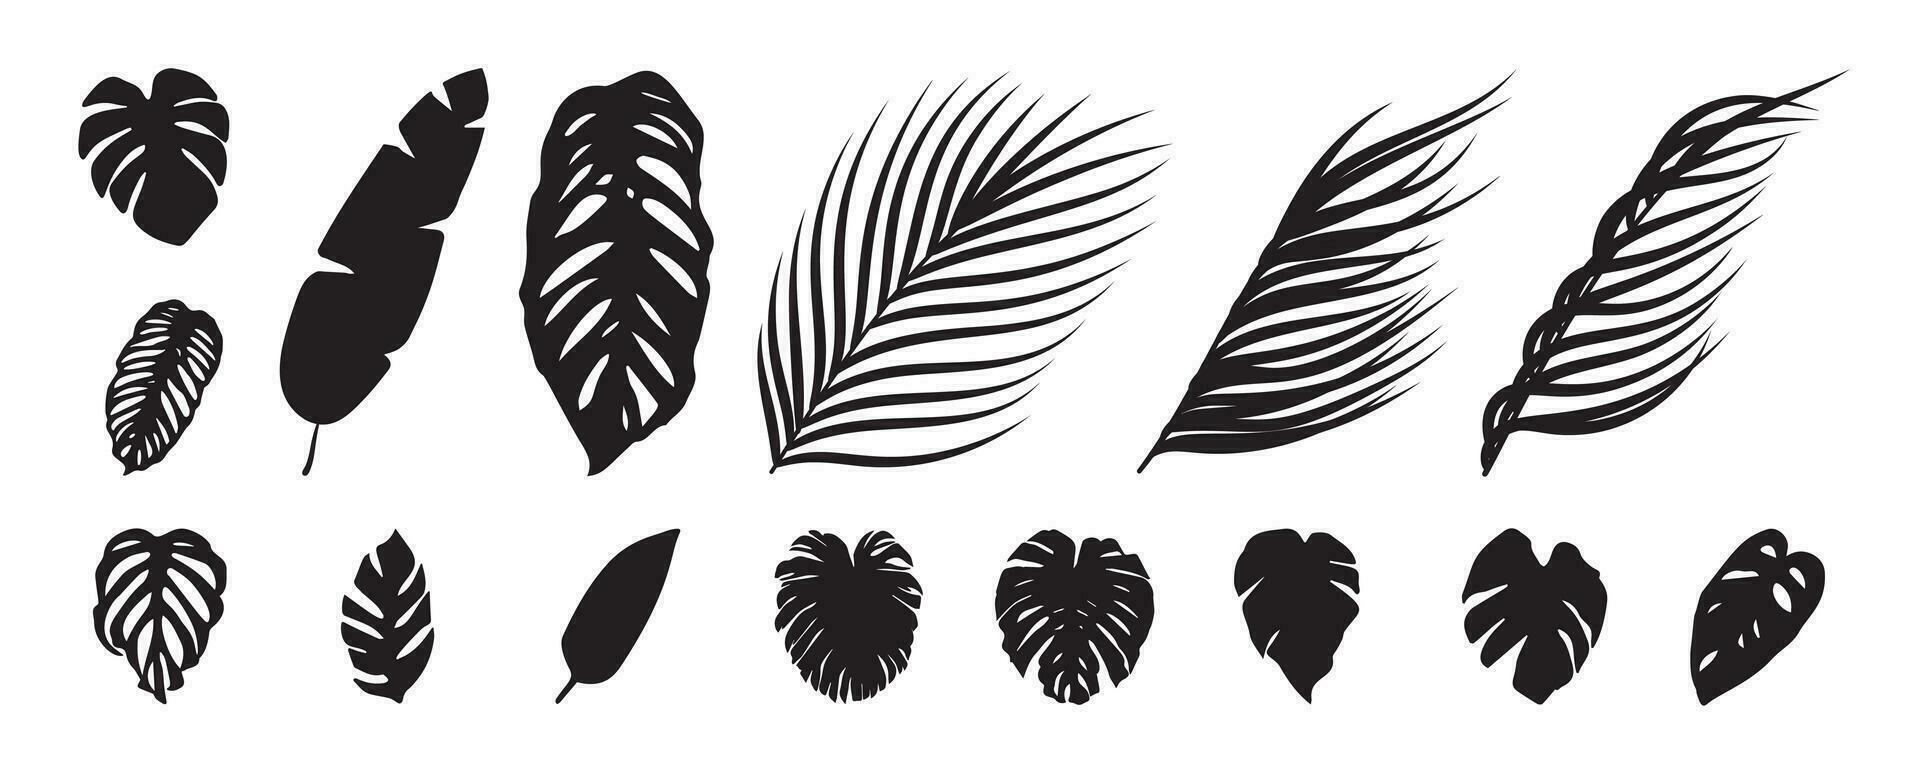 Collection of silhouette leaf elements. Set of tropical plants, leaf branch, palm, monstera leaves, foliage, banana leaf. Hand drawn of botanical vectors for decor, website, graphic, decorative.